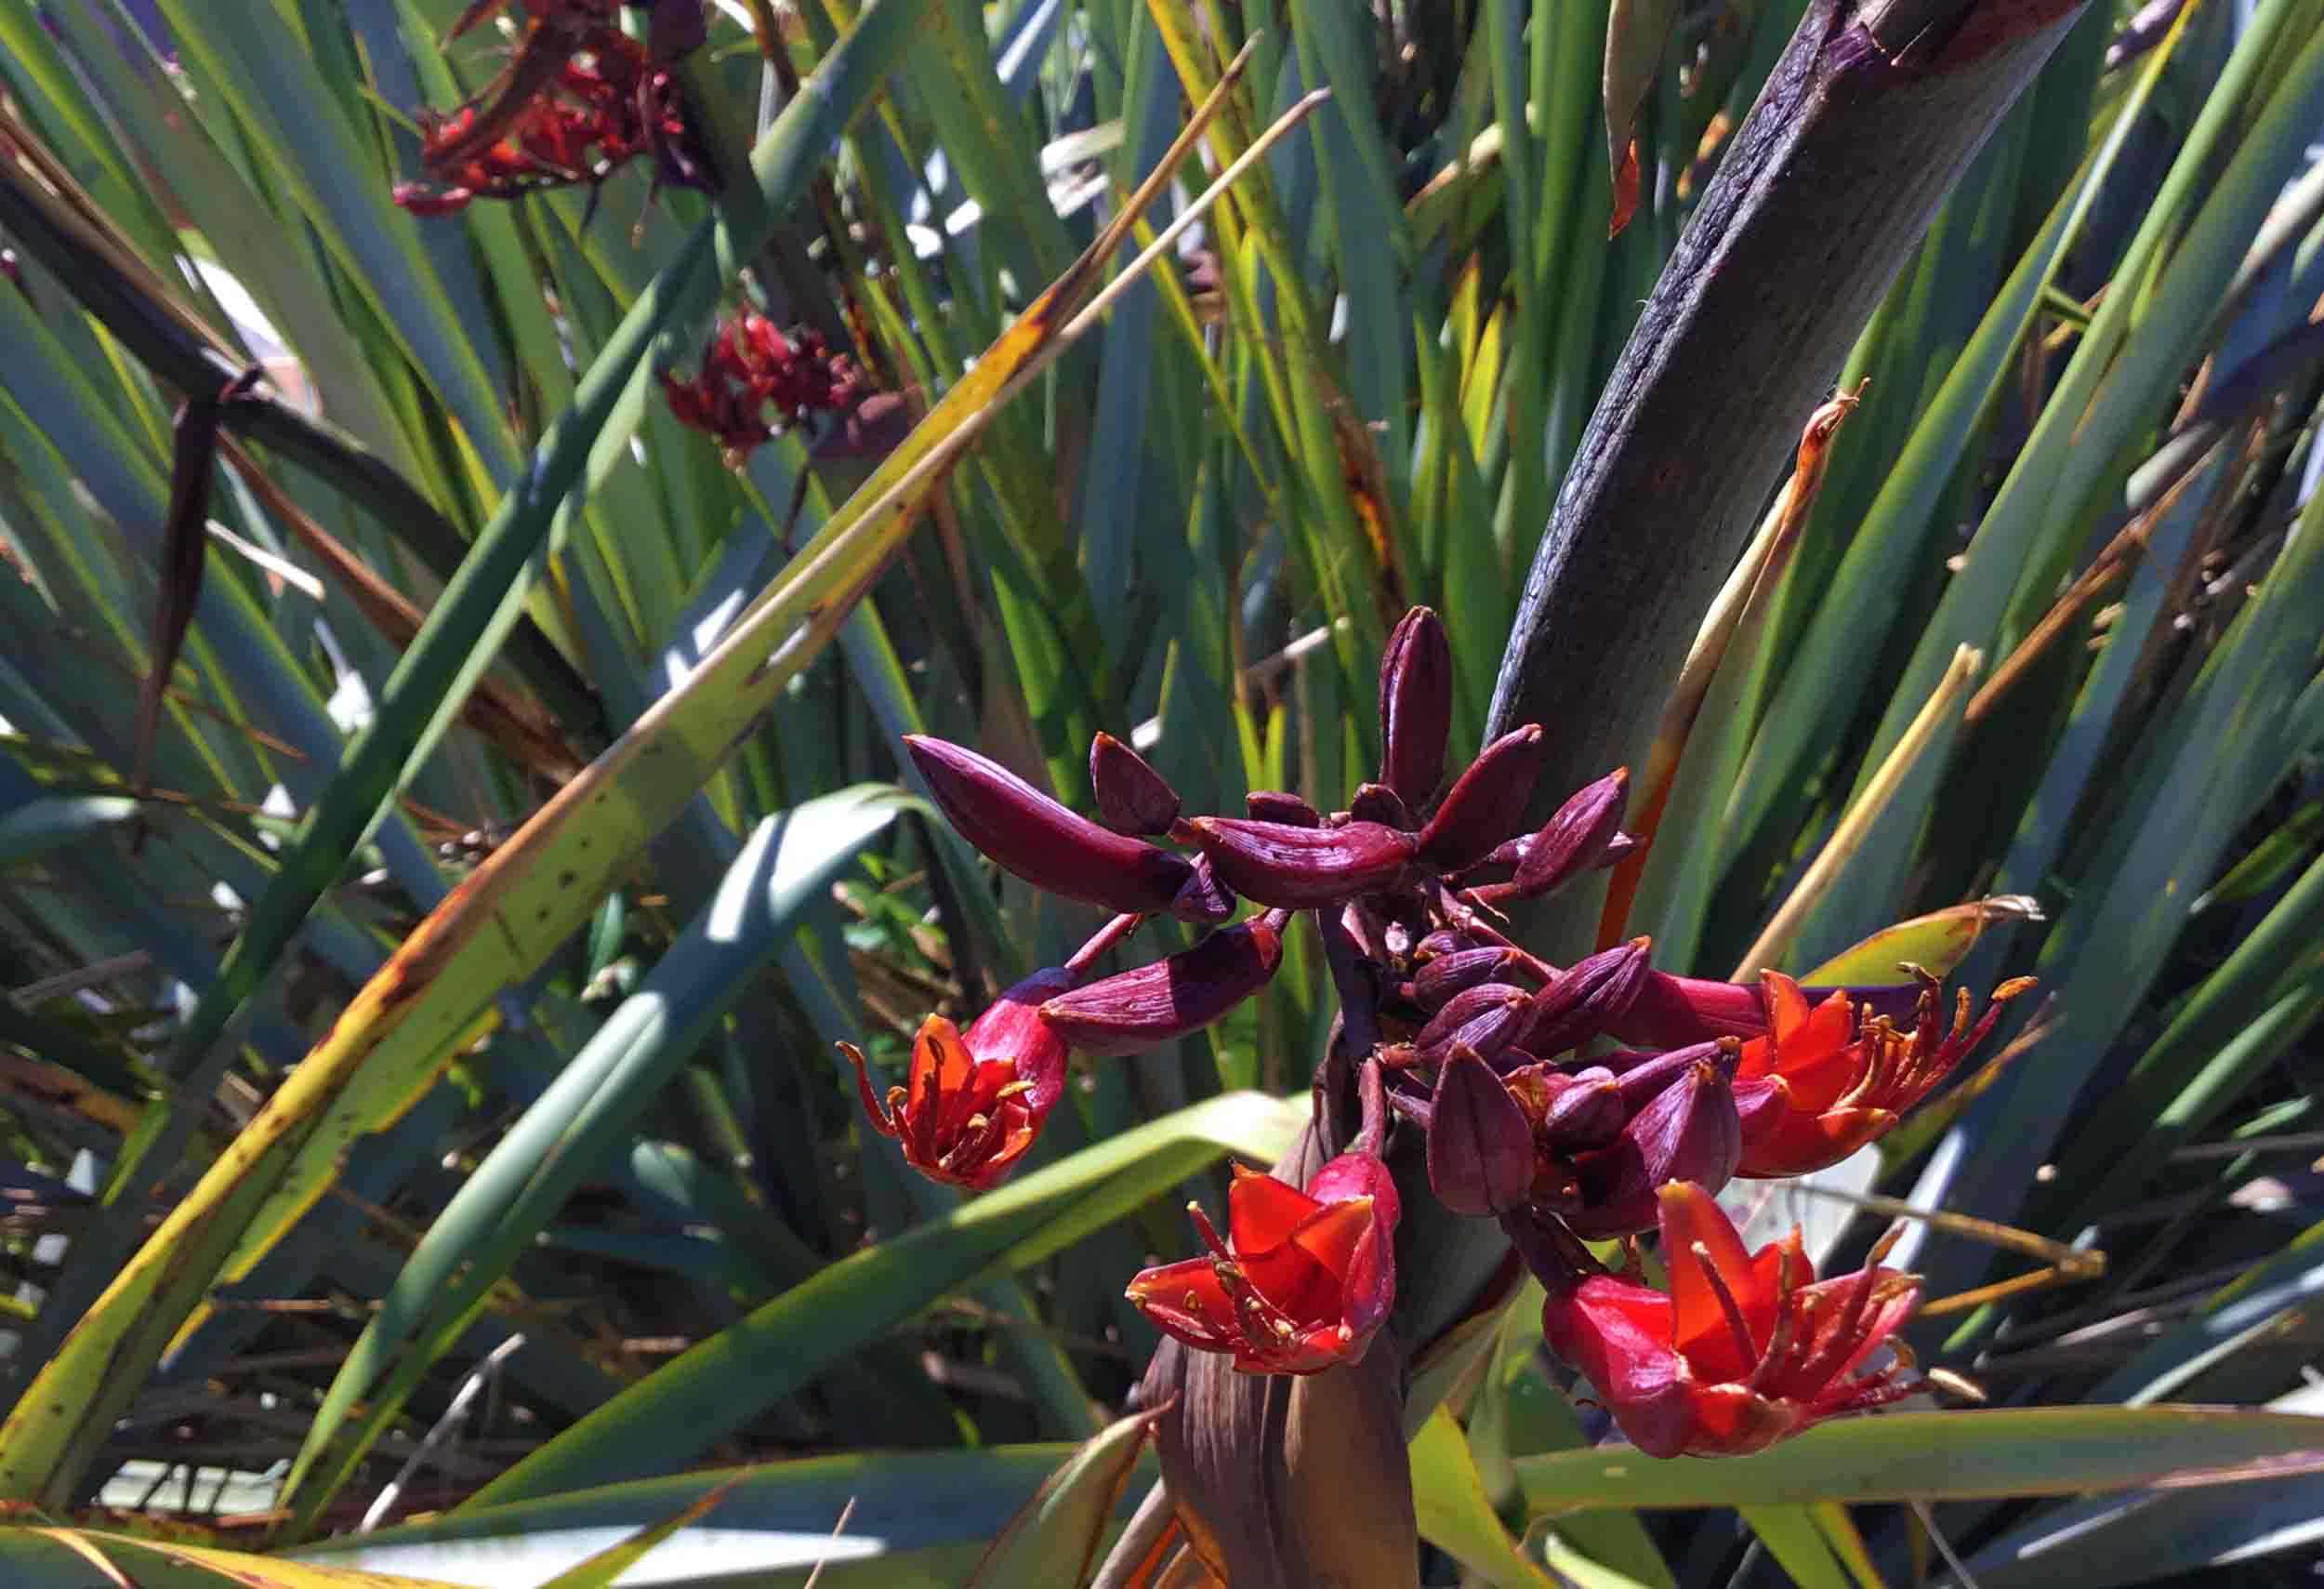 New Zealand flax - red flowers in the foreground, and the fibrous leaves behind. Image: Mike Pole.